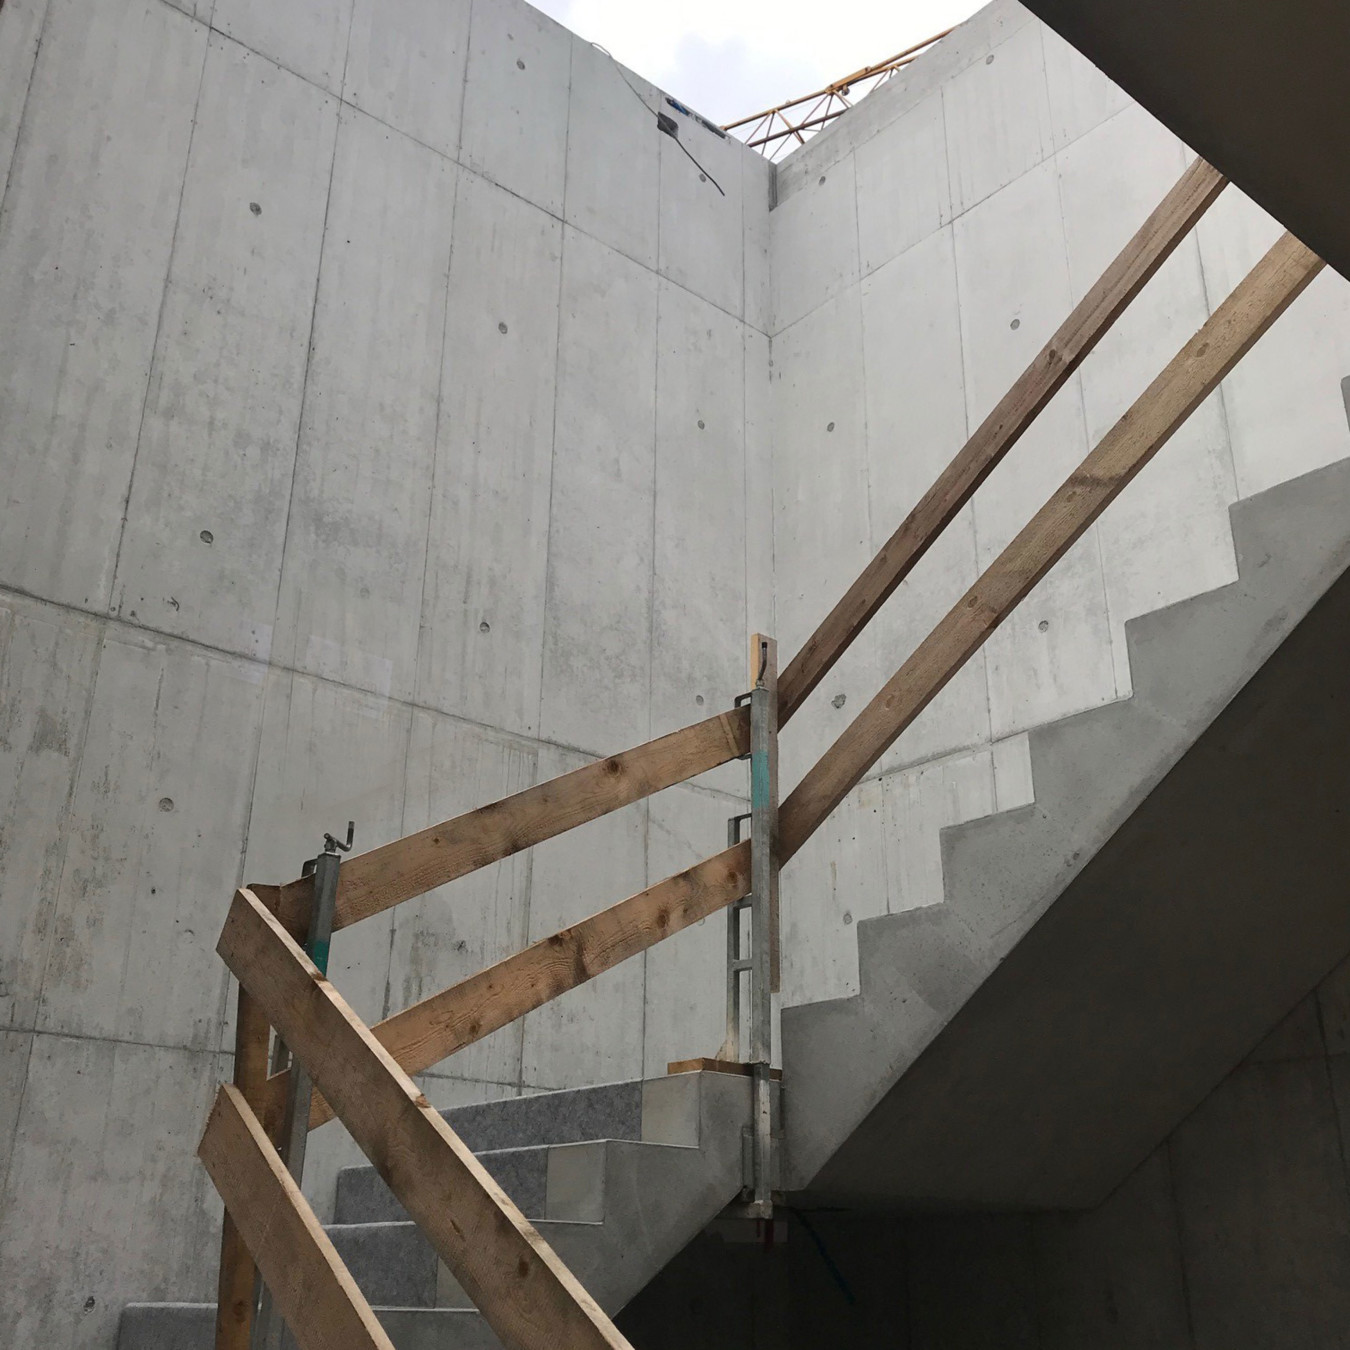 Smooth concrete walls and stairs